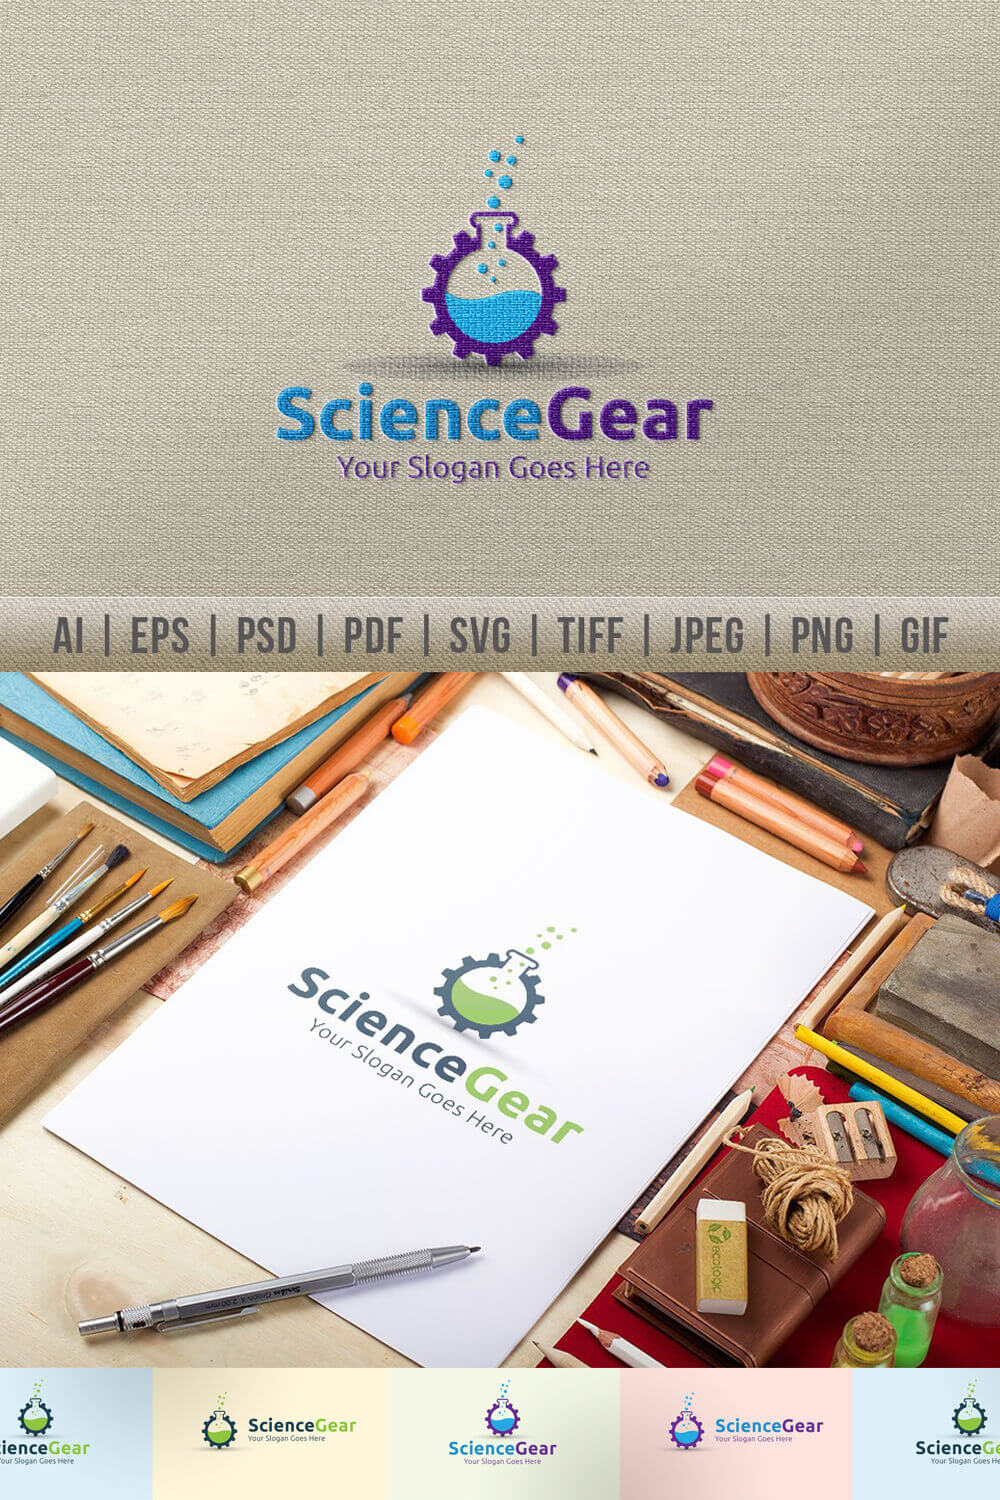 Title and logo: Science Gear, Your slogan goes here.